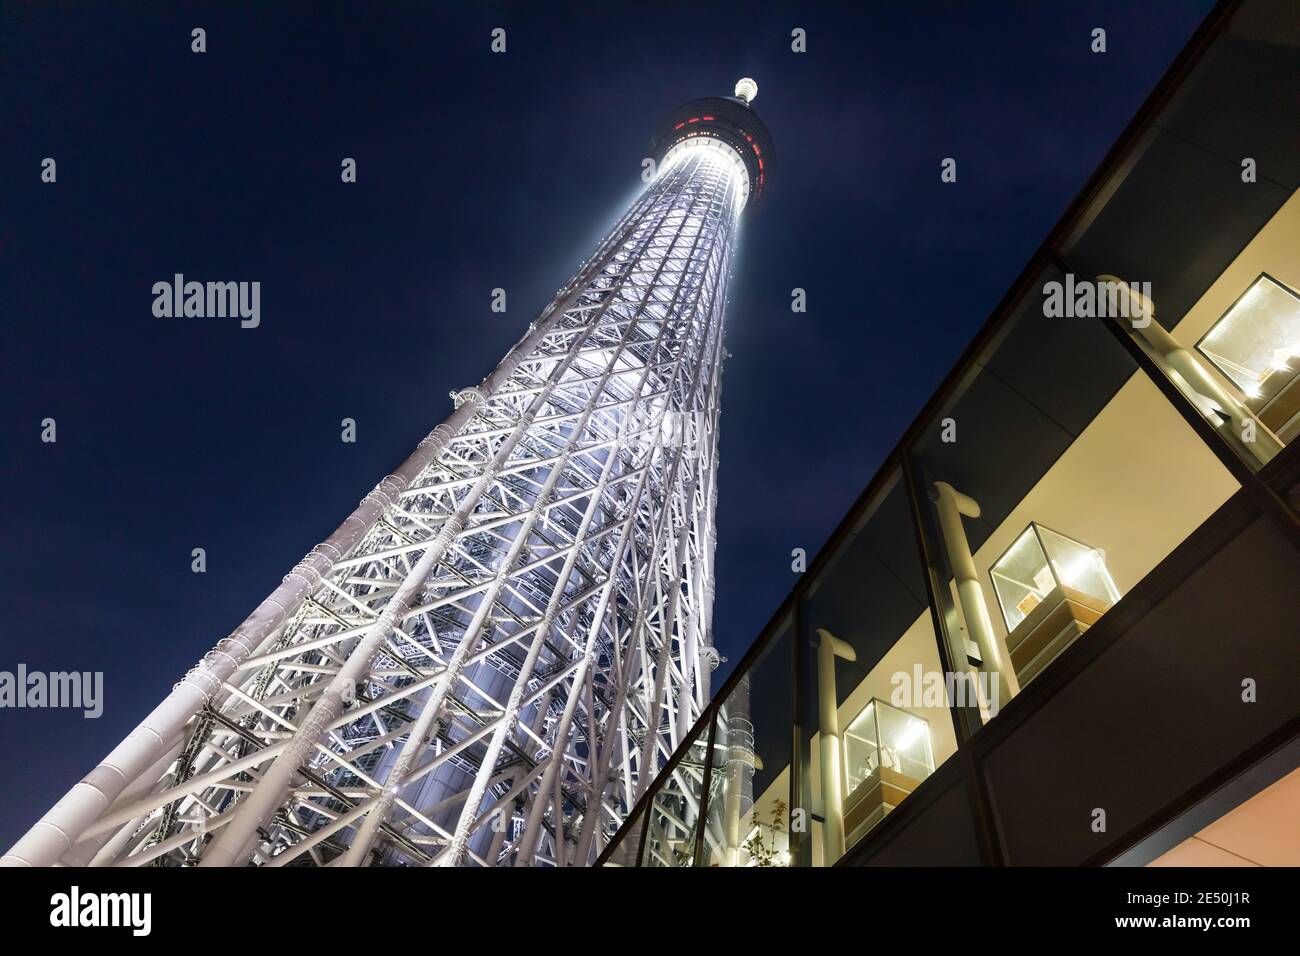 Wide angle view from below of the Tokyo Sky Tree observation tower at night Stock Photo